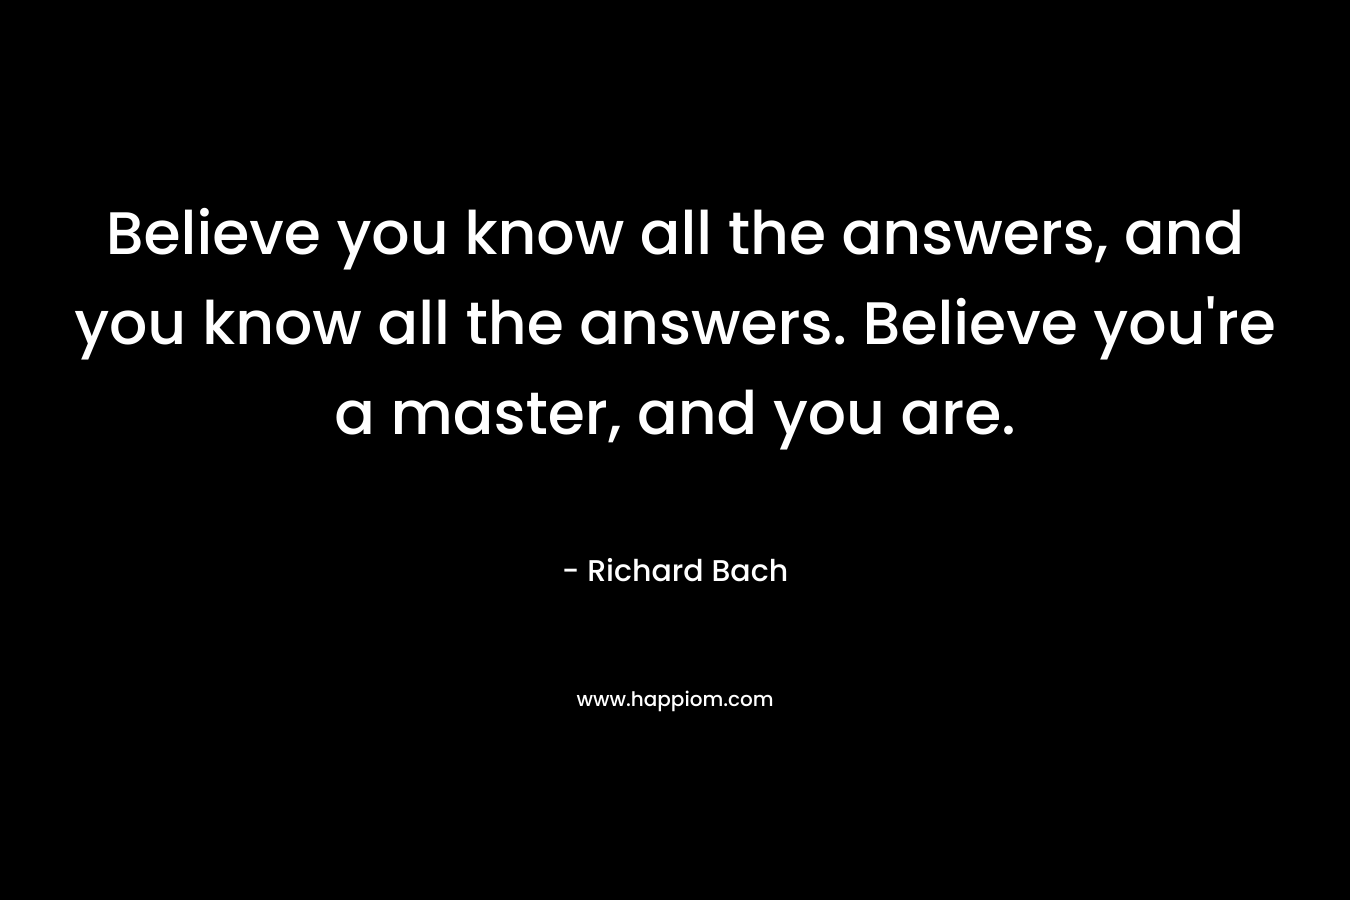 Believe you know all the answers, and you know all the answers. Believe you’re a master, and you are. – Richard Bach